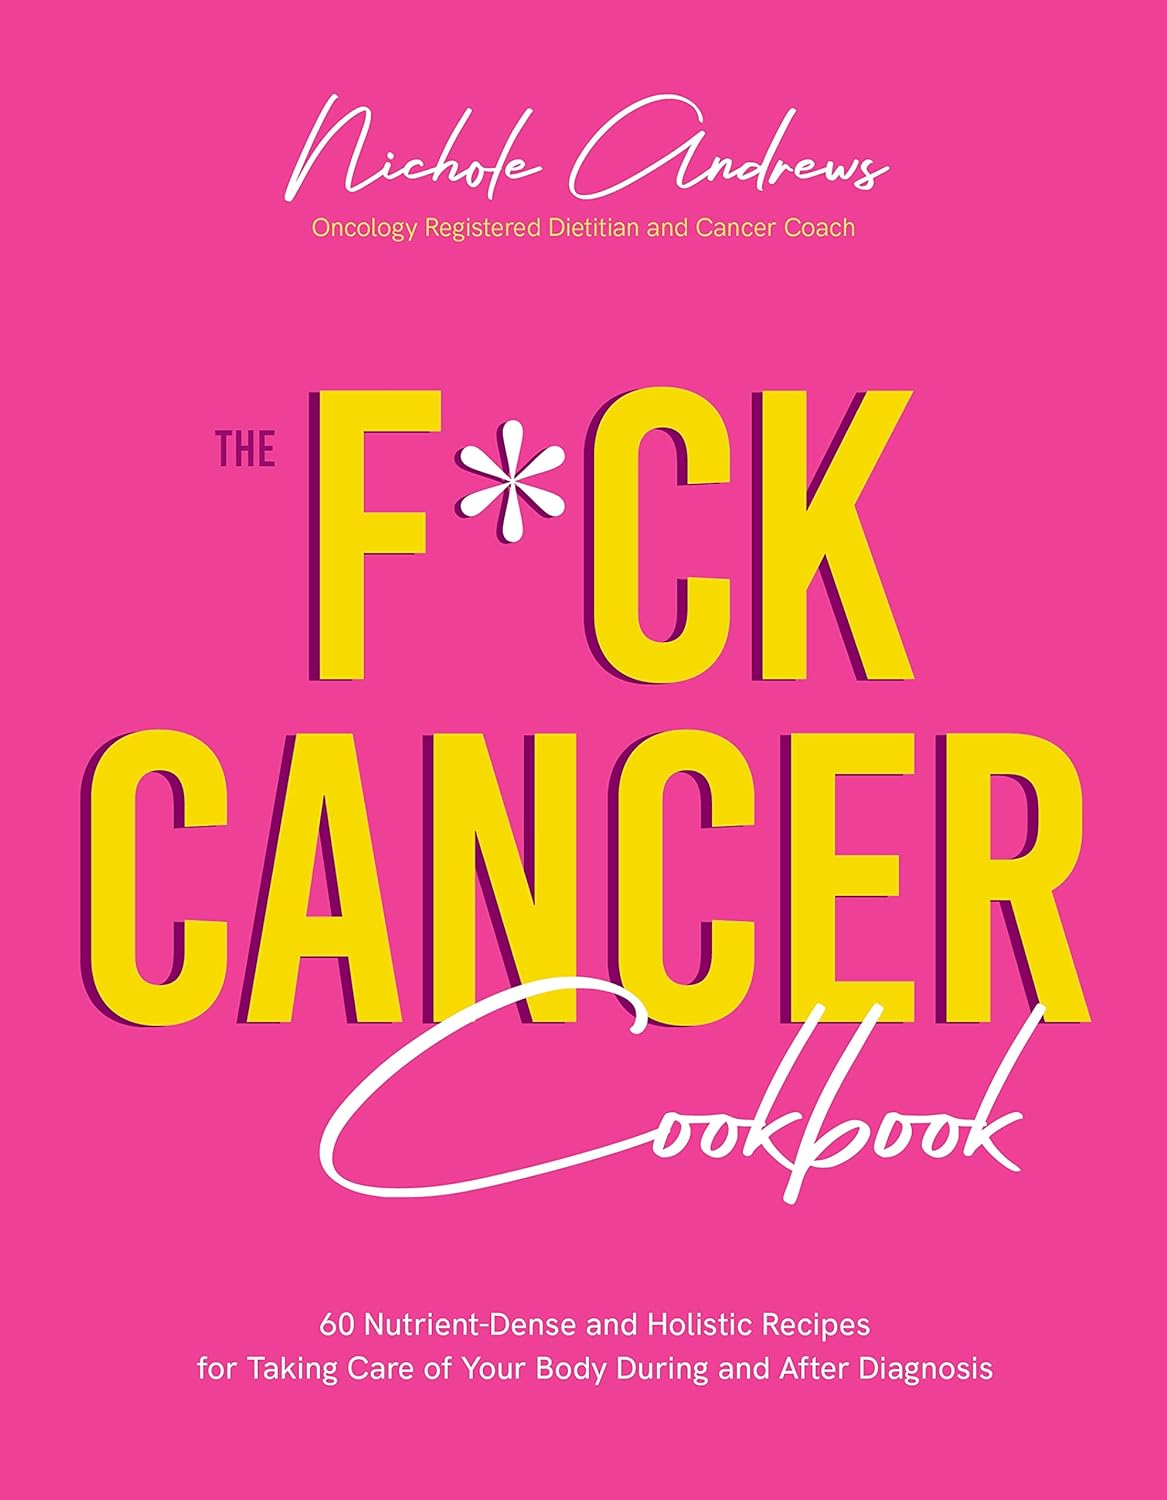 The Fck Cancer Cookbook 60 Nutrient-Dense and Holistic Recipes for Taking Care of Your Body During and After Diagnosis - SureShot Books Publishing LLC